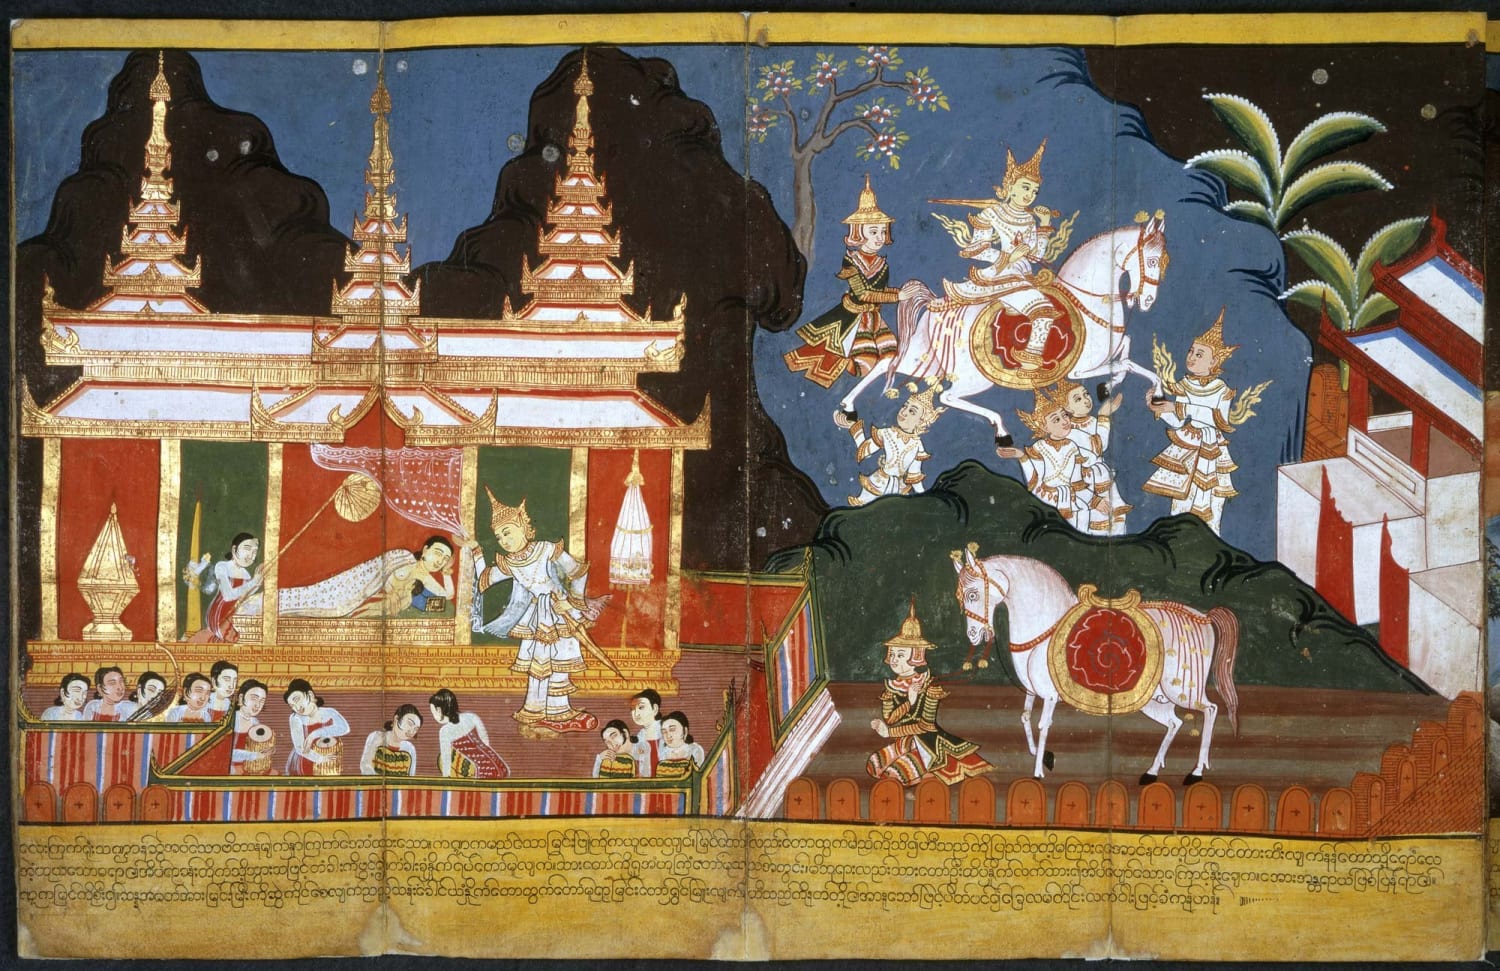 Scene from Life of Buddha from a 19th-century Burmese illustrated manuscript